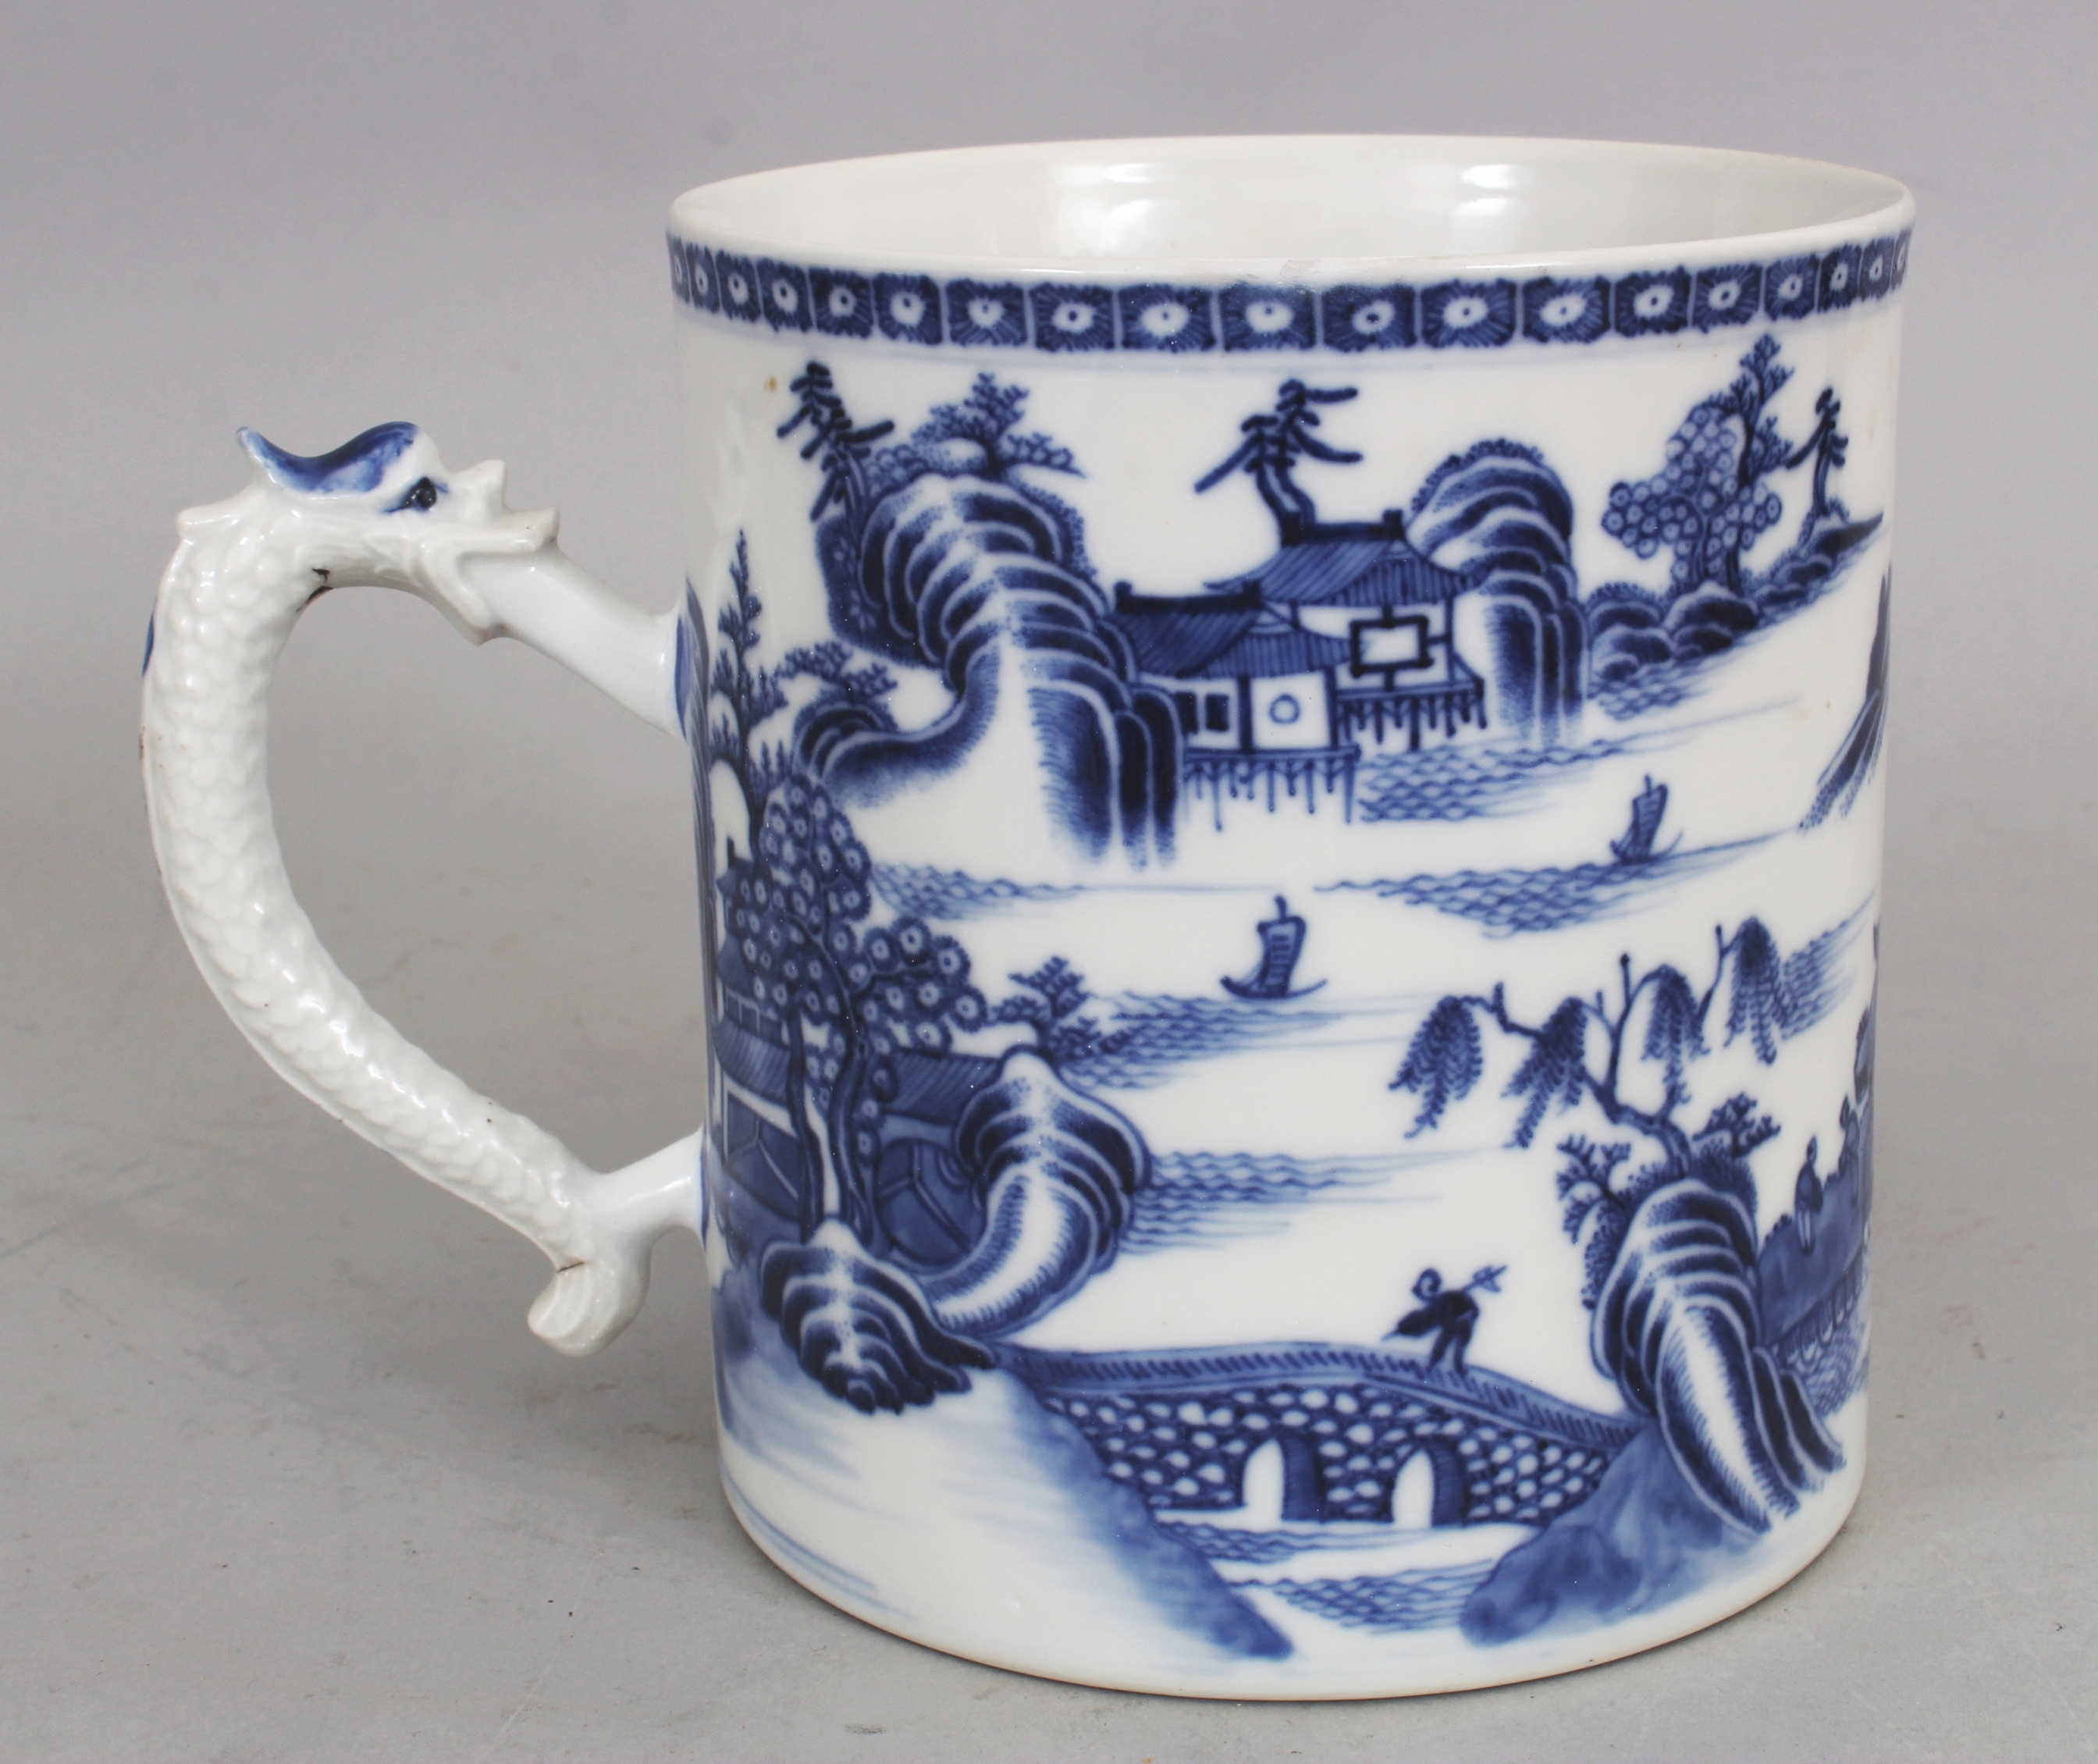 AN 18TH CENTURY CHINESE QIANLONG PERIOD BLUE & WHITE PORCELAIN TANKARD, painted with a river - Image 3 of 6